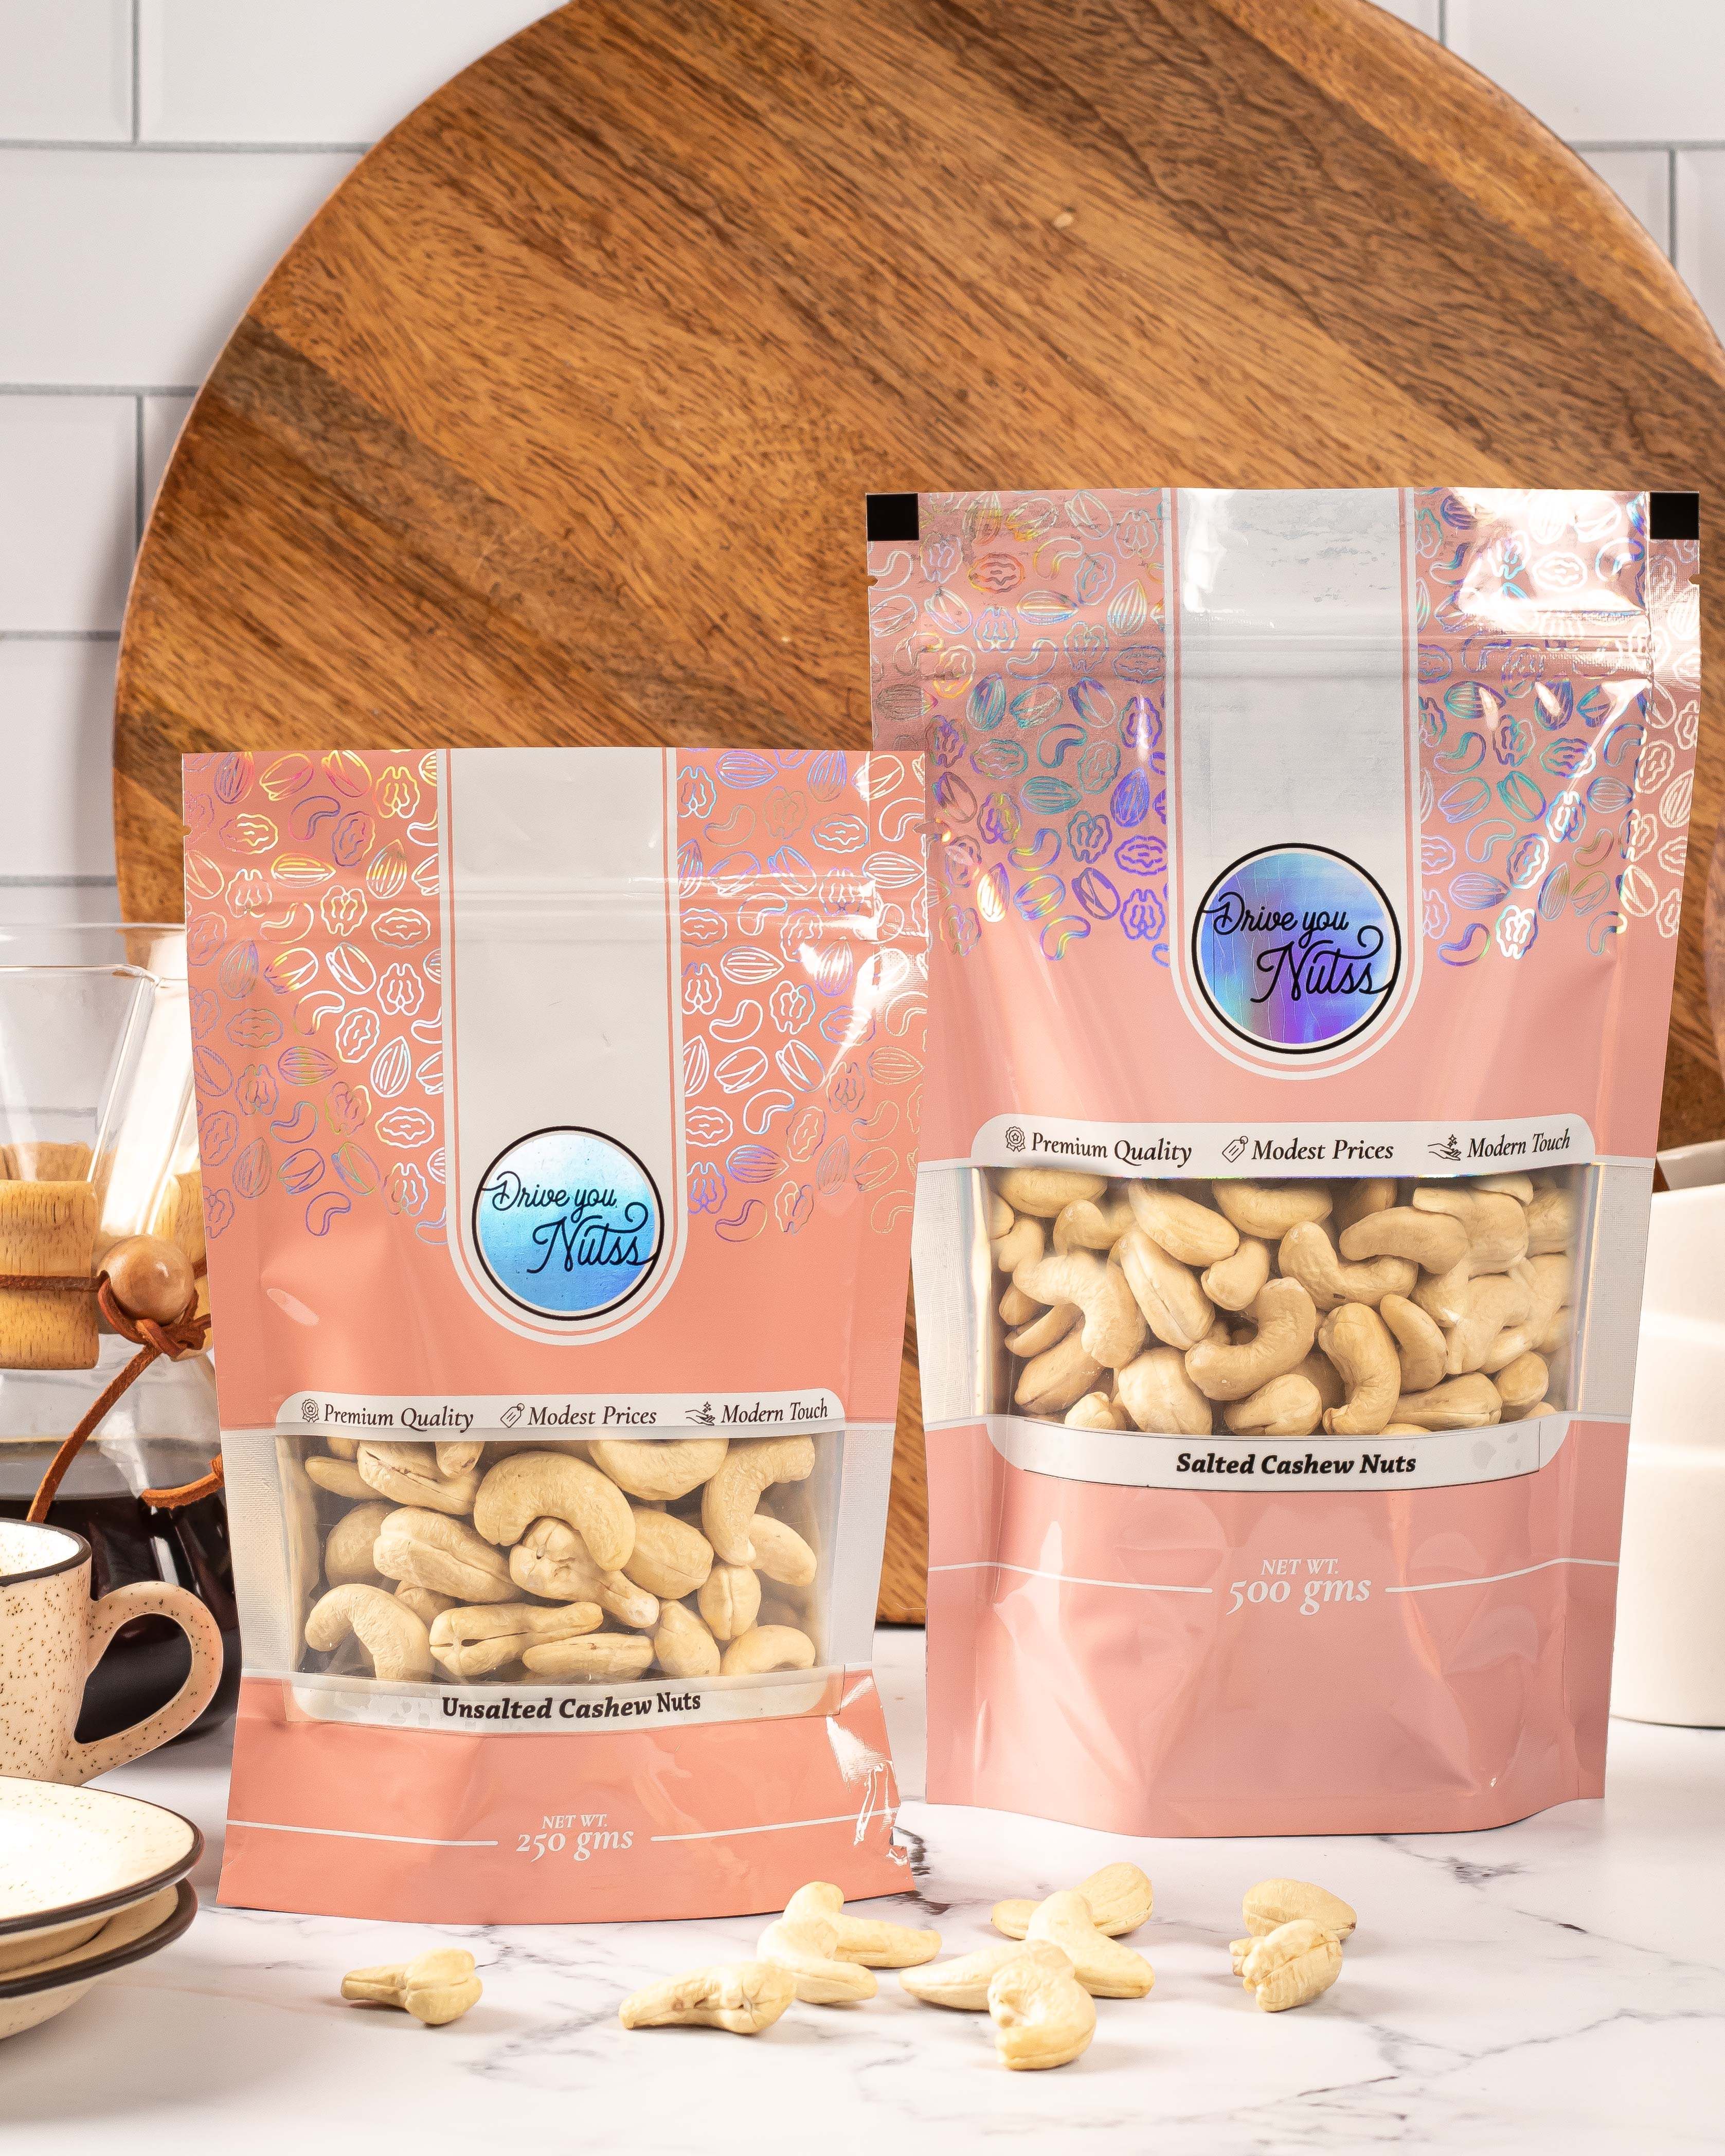 Drive You Nutss | Unsalted Cashew Nuts (500 Gms) undefined